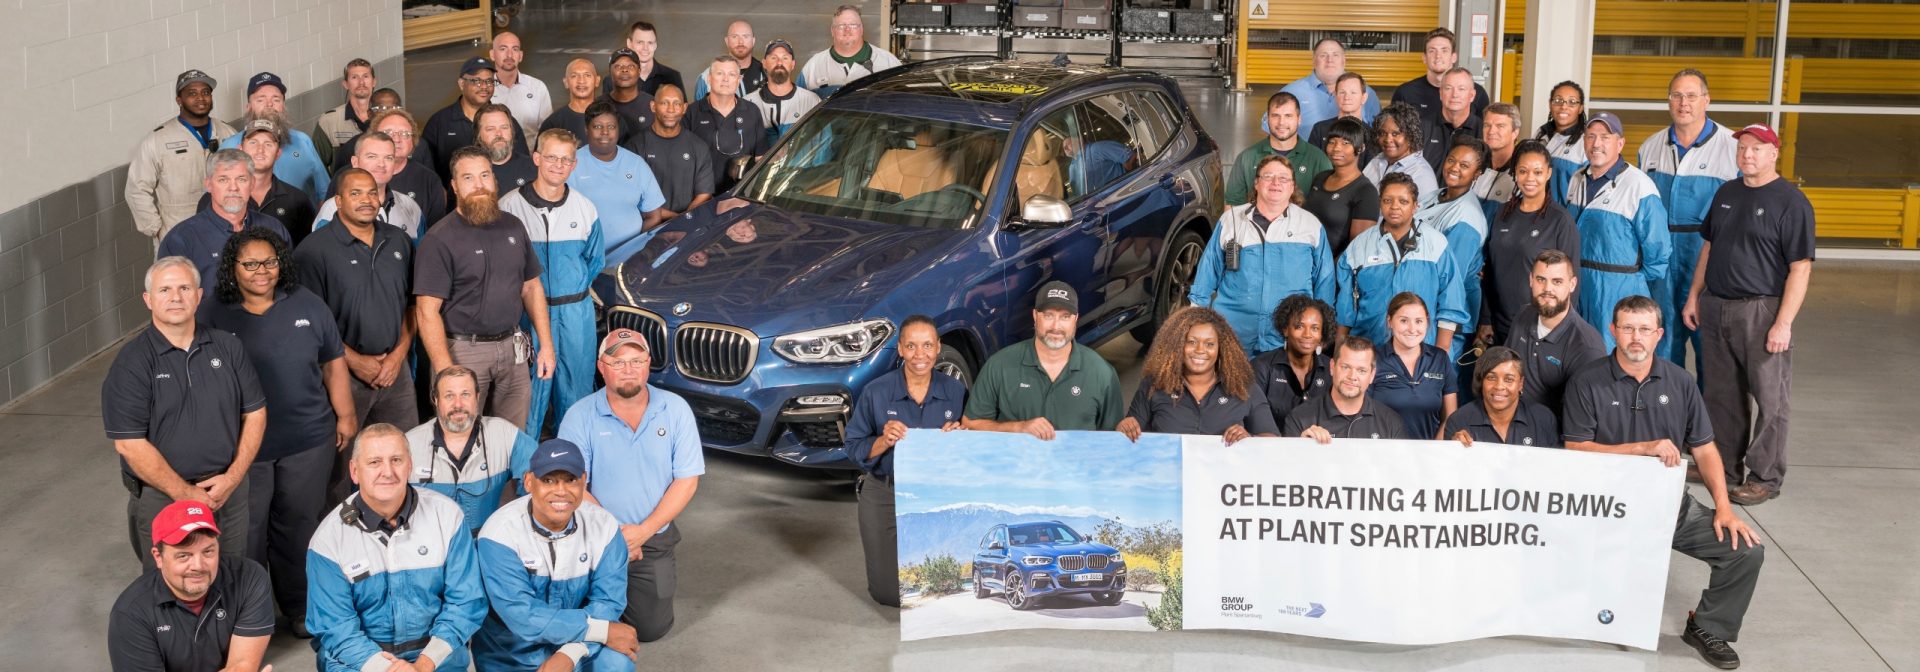 Associates celebrating four millionth BMW Assembled at Plant Spartanburg. They are gathered around the vehicle with a banner. 